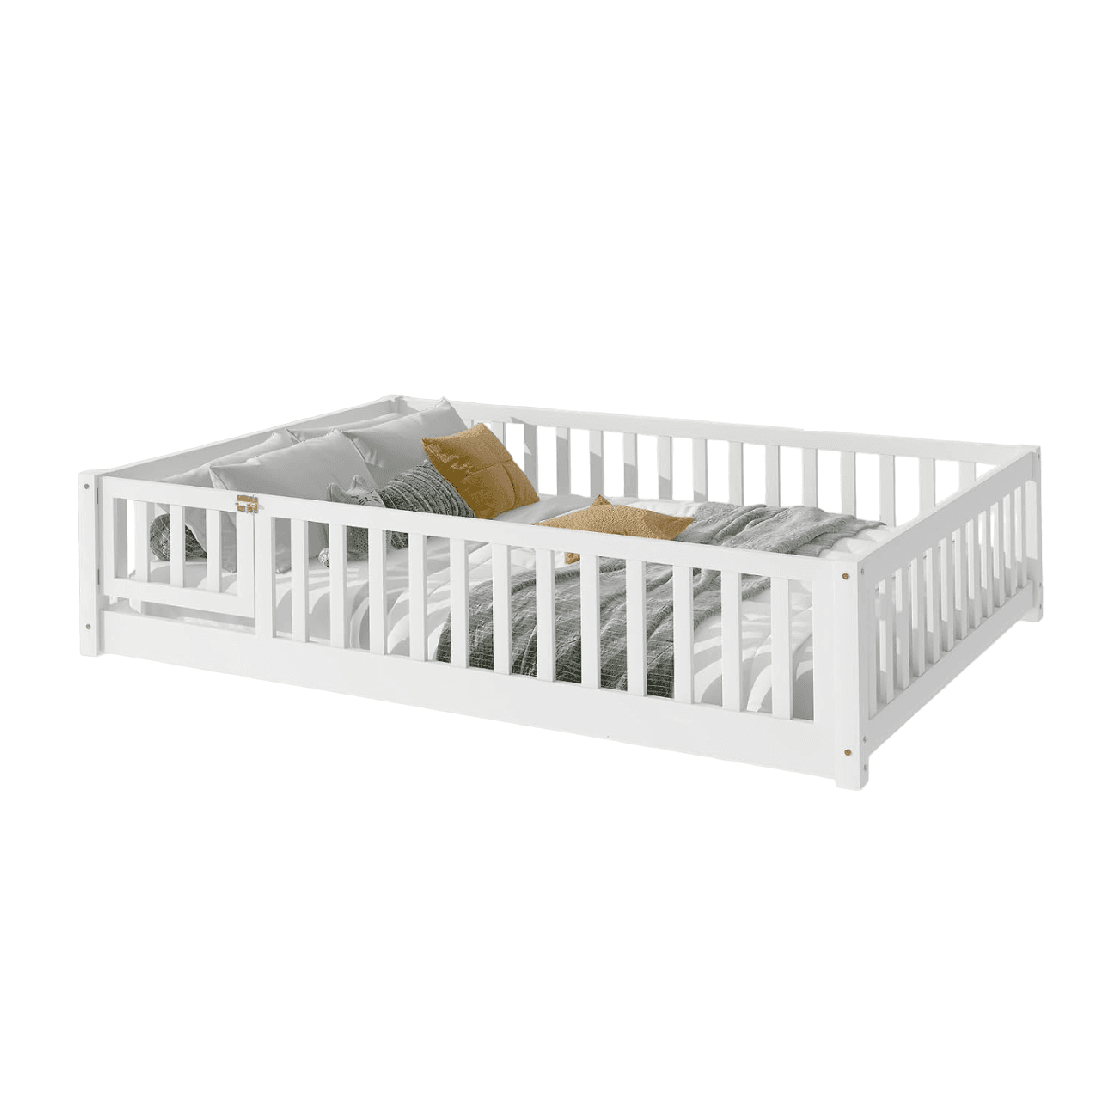 Montessori Tatub Full Size Floor Bed With Rails and Door and Slats Milky White